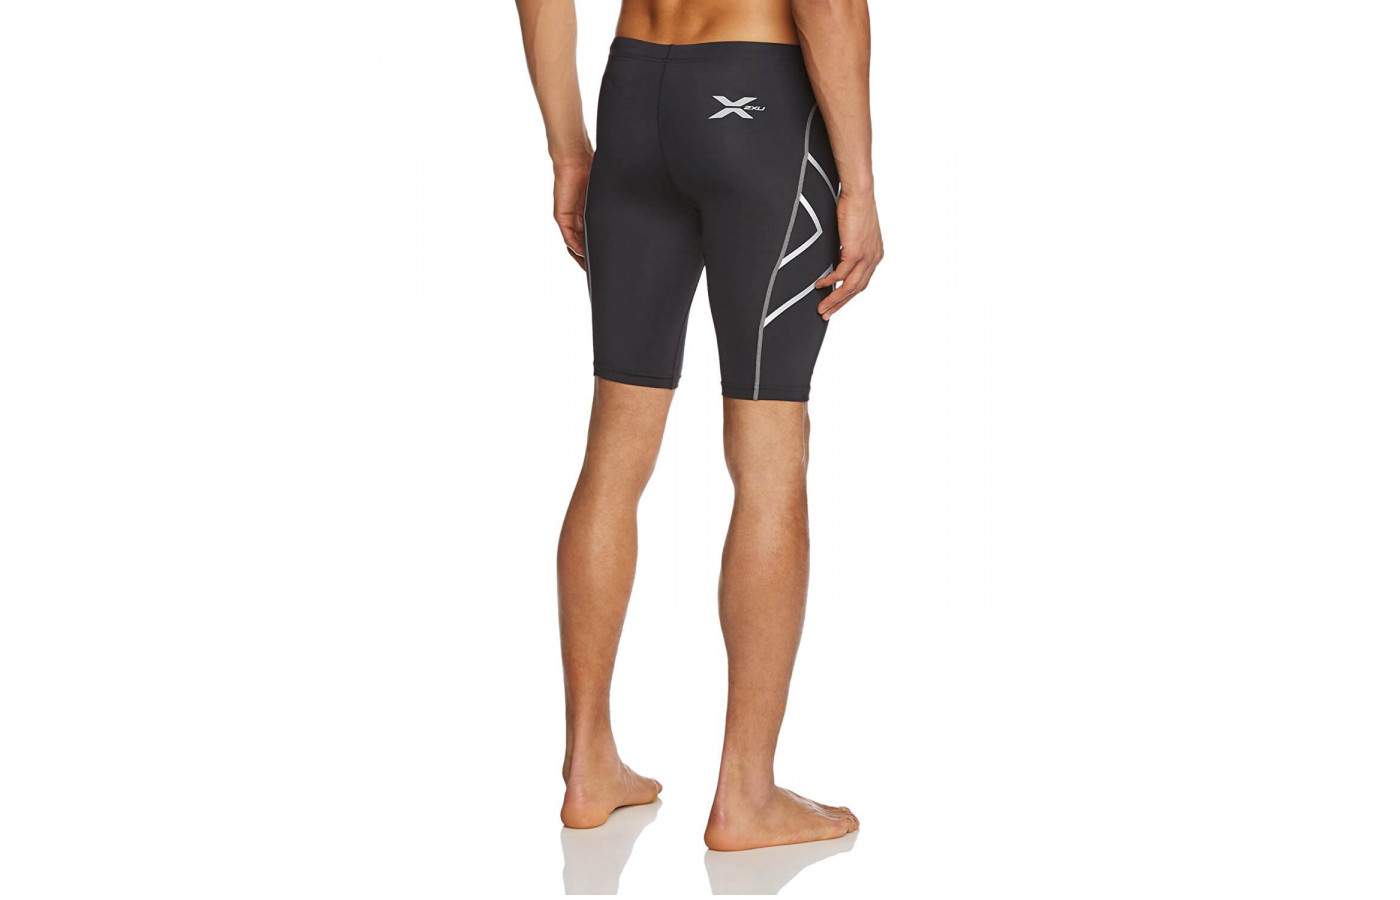 The 2XU Compression Shorts can help to prevent DOMS after a workout.